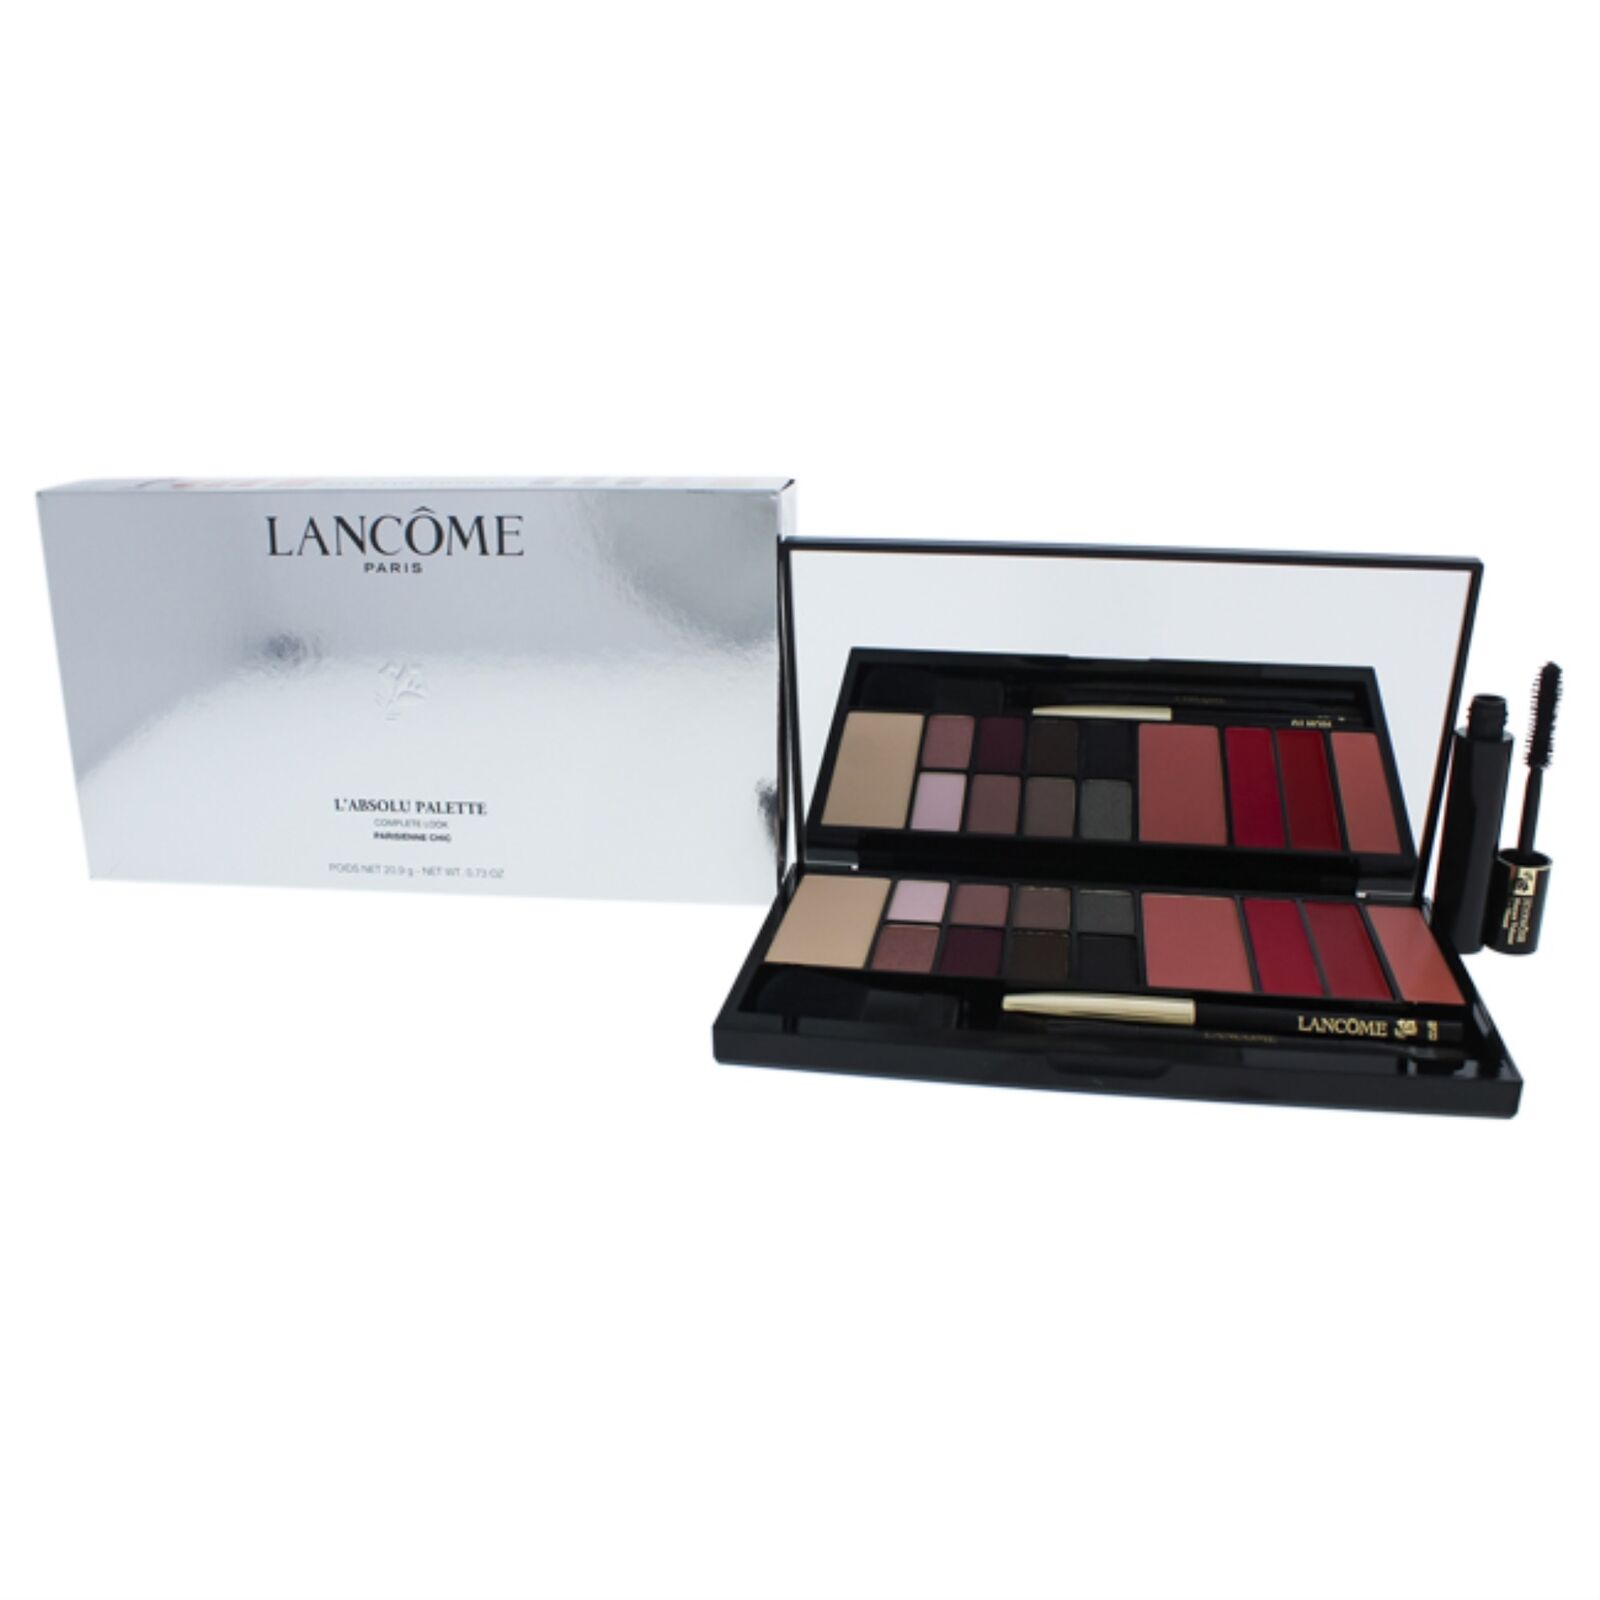 Labsolu Palette Complete Look - Parisienne Chic By Lancome For Women - 0.73 O...